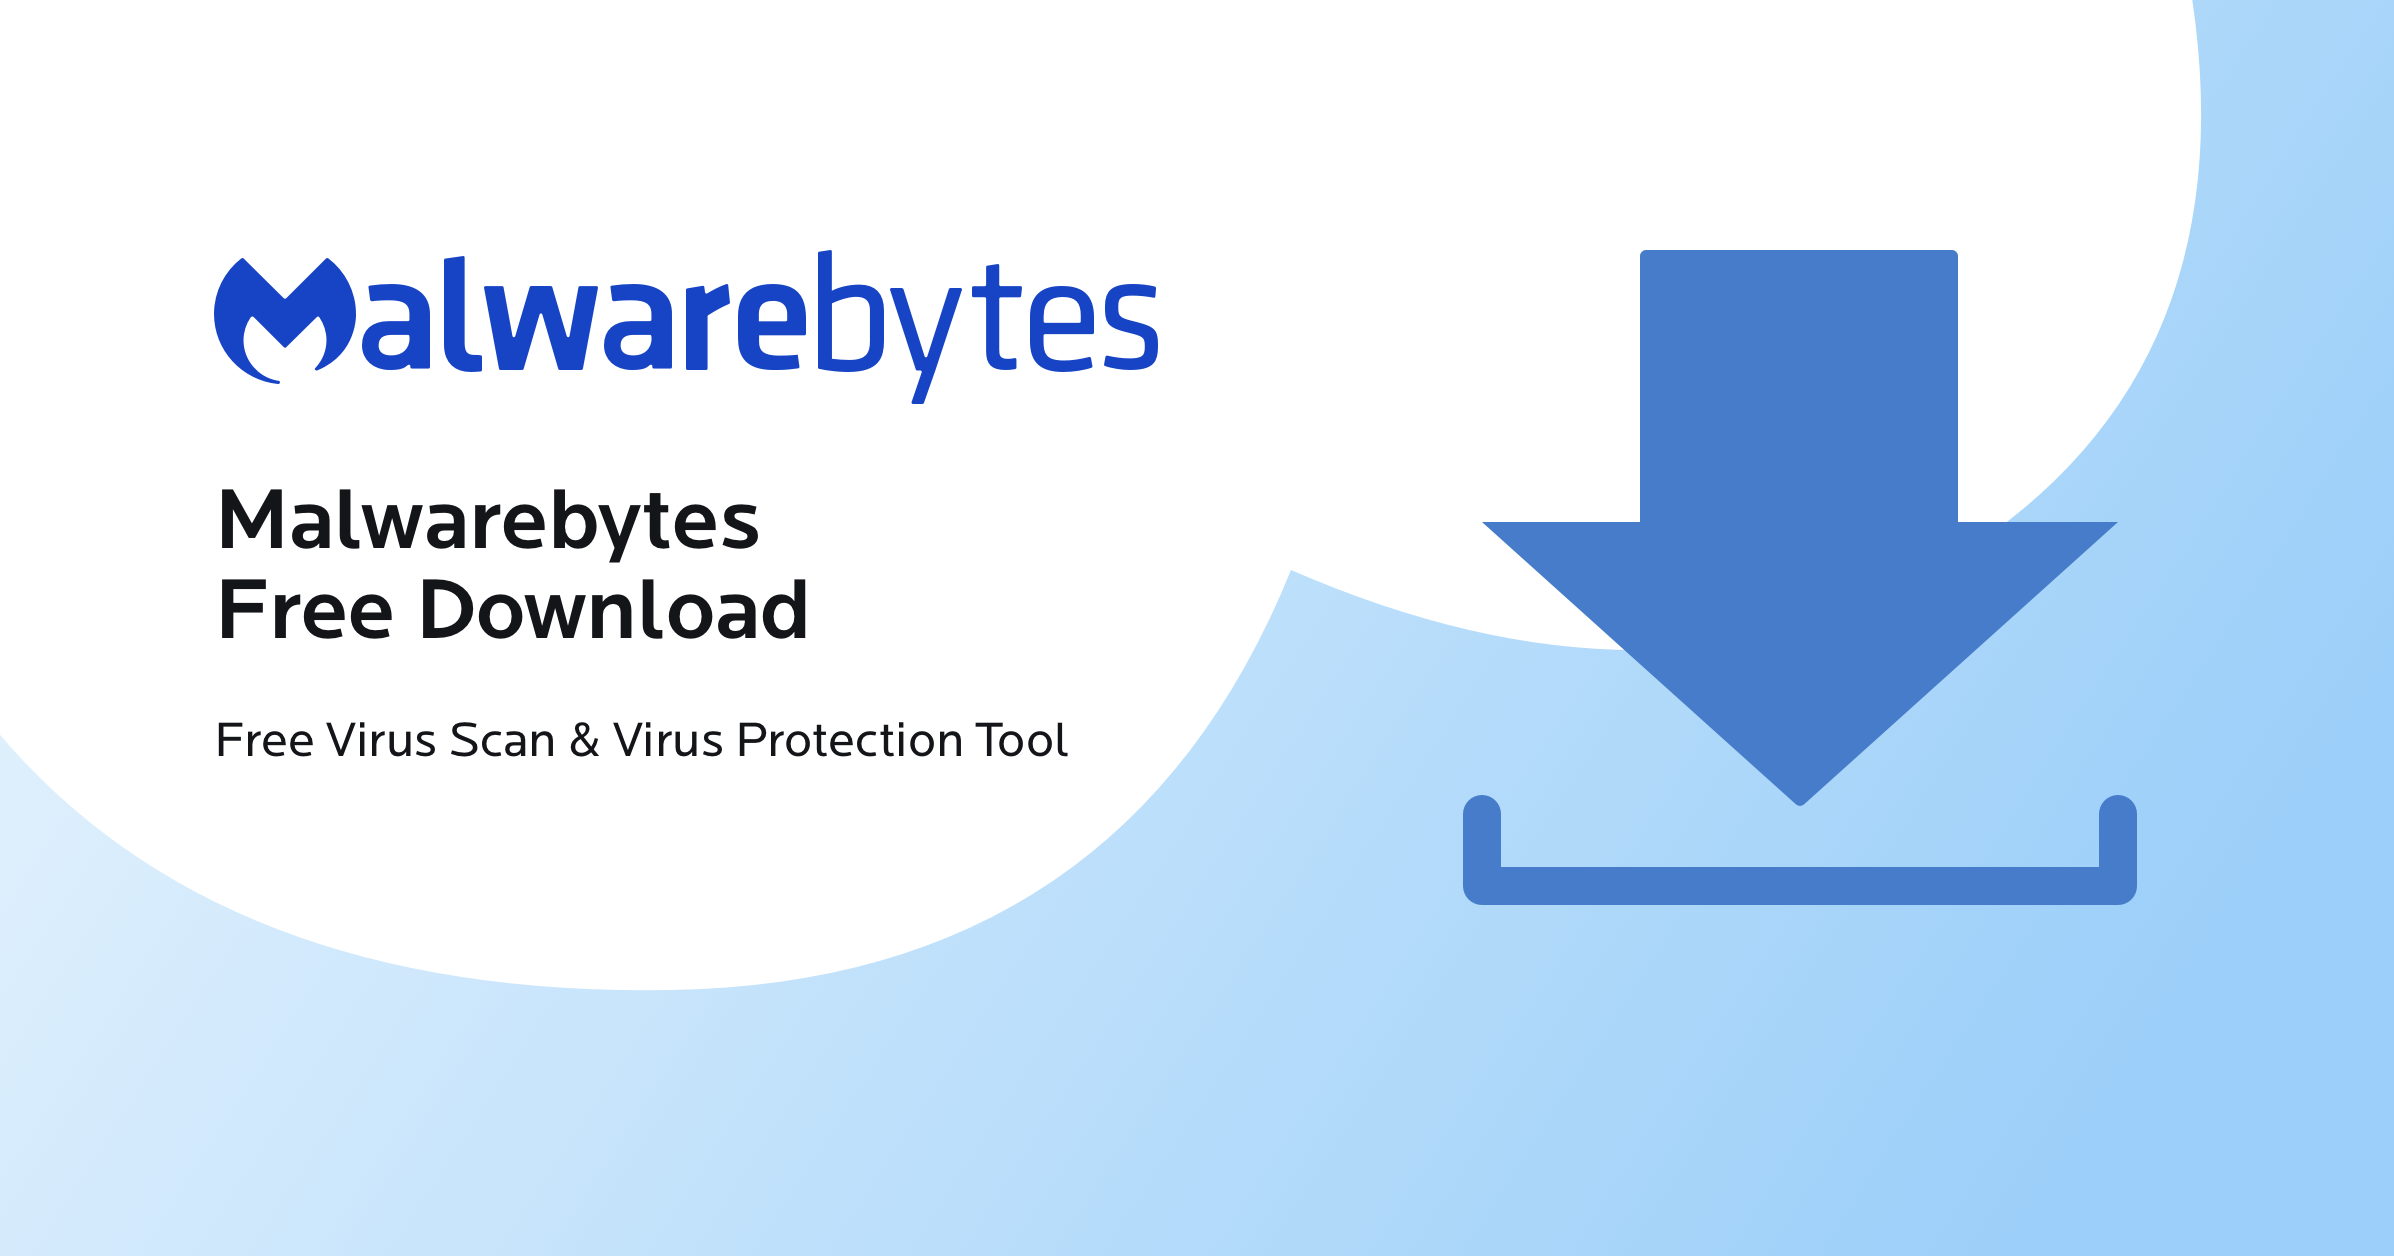 Download and install a reliable anti-malware program
Run a thorough scan of your computer